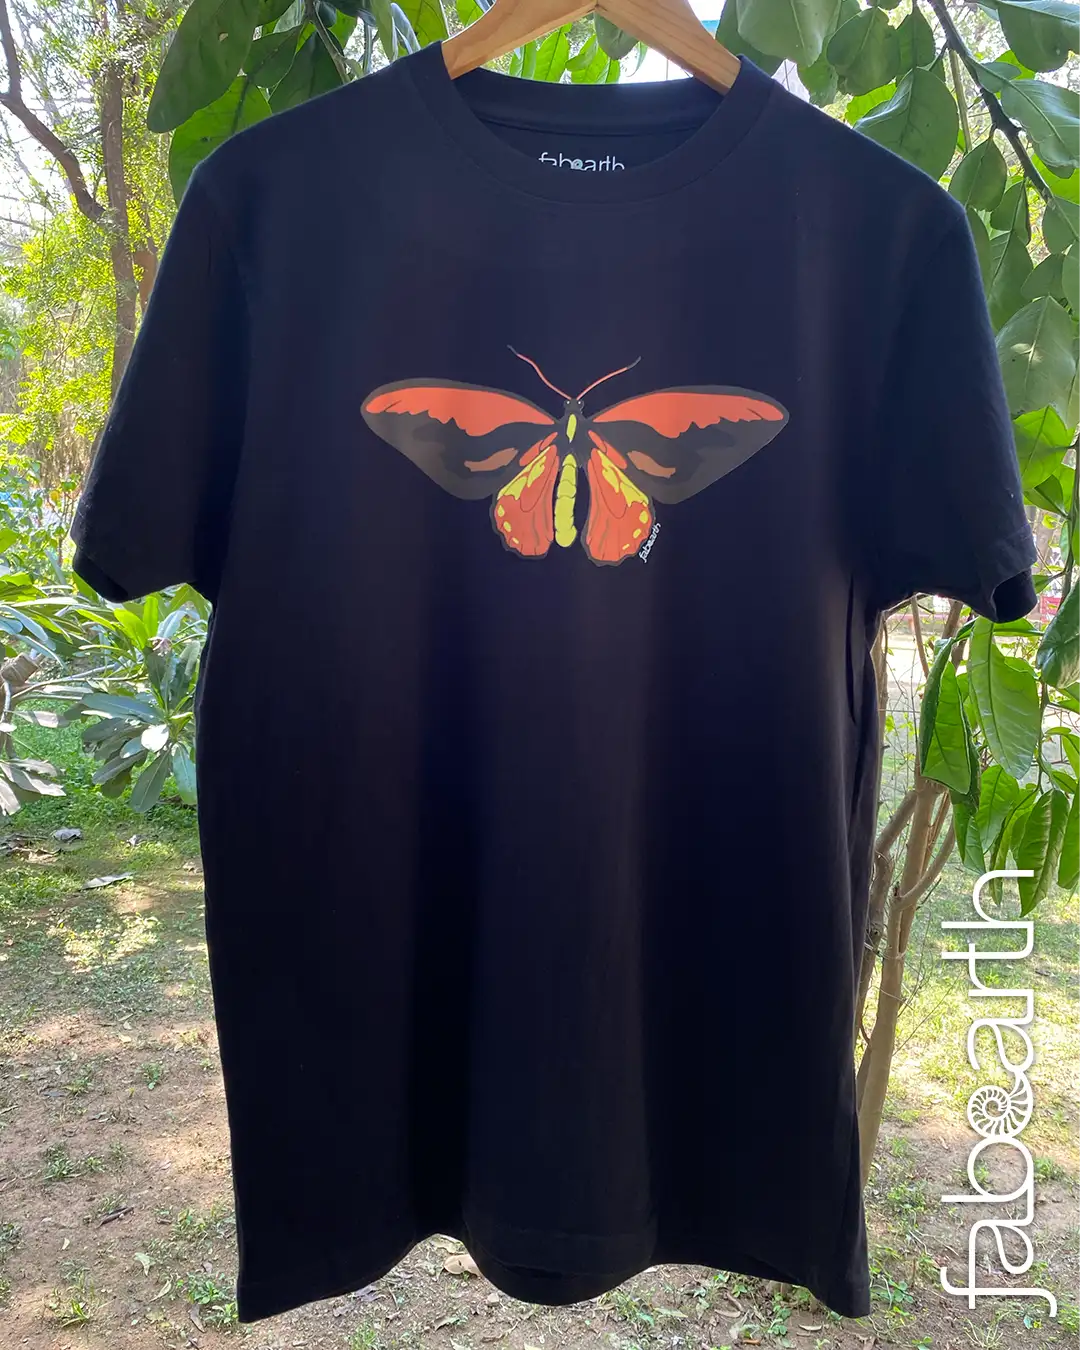 Wallace's Golden Birdwing Tee front by Fabearth